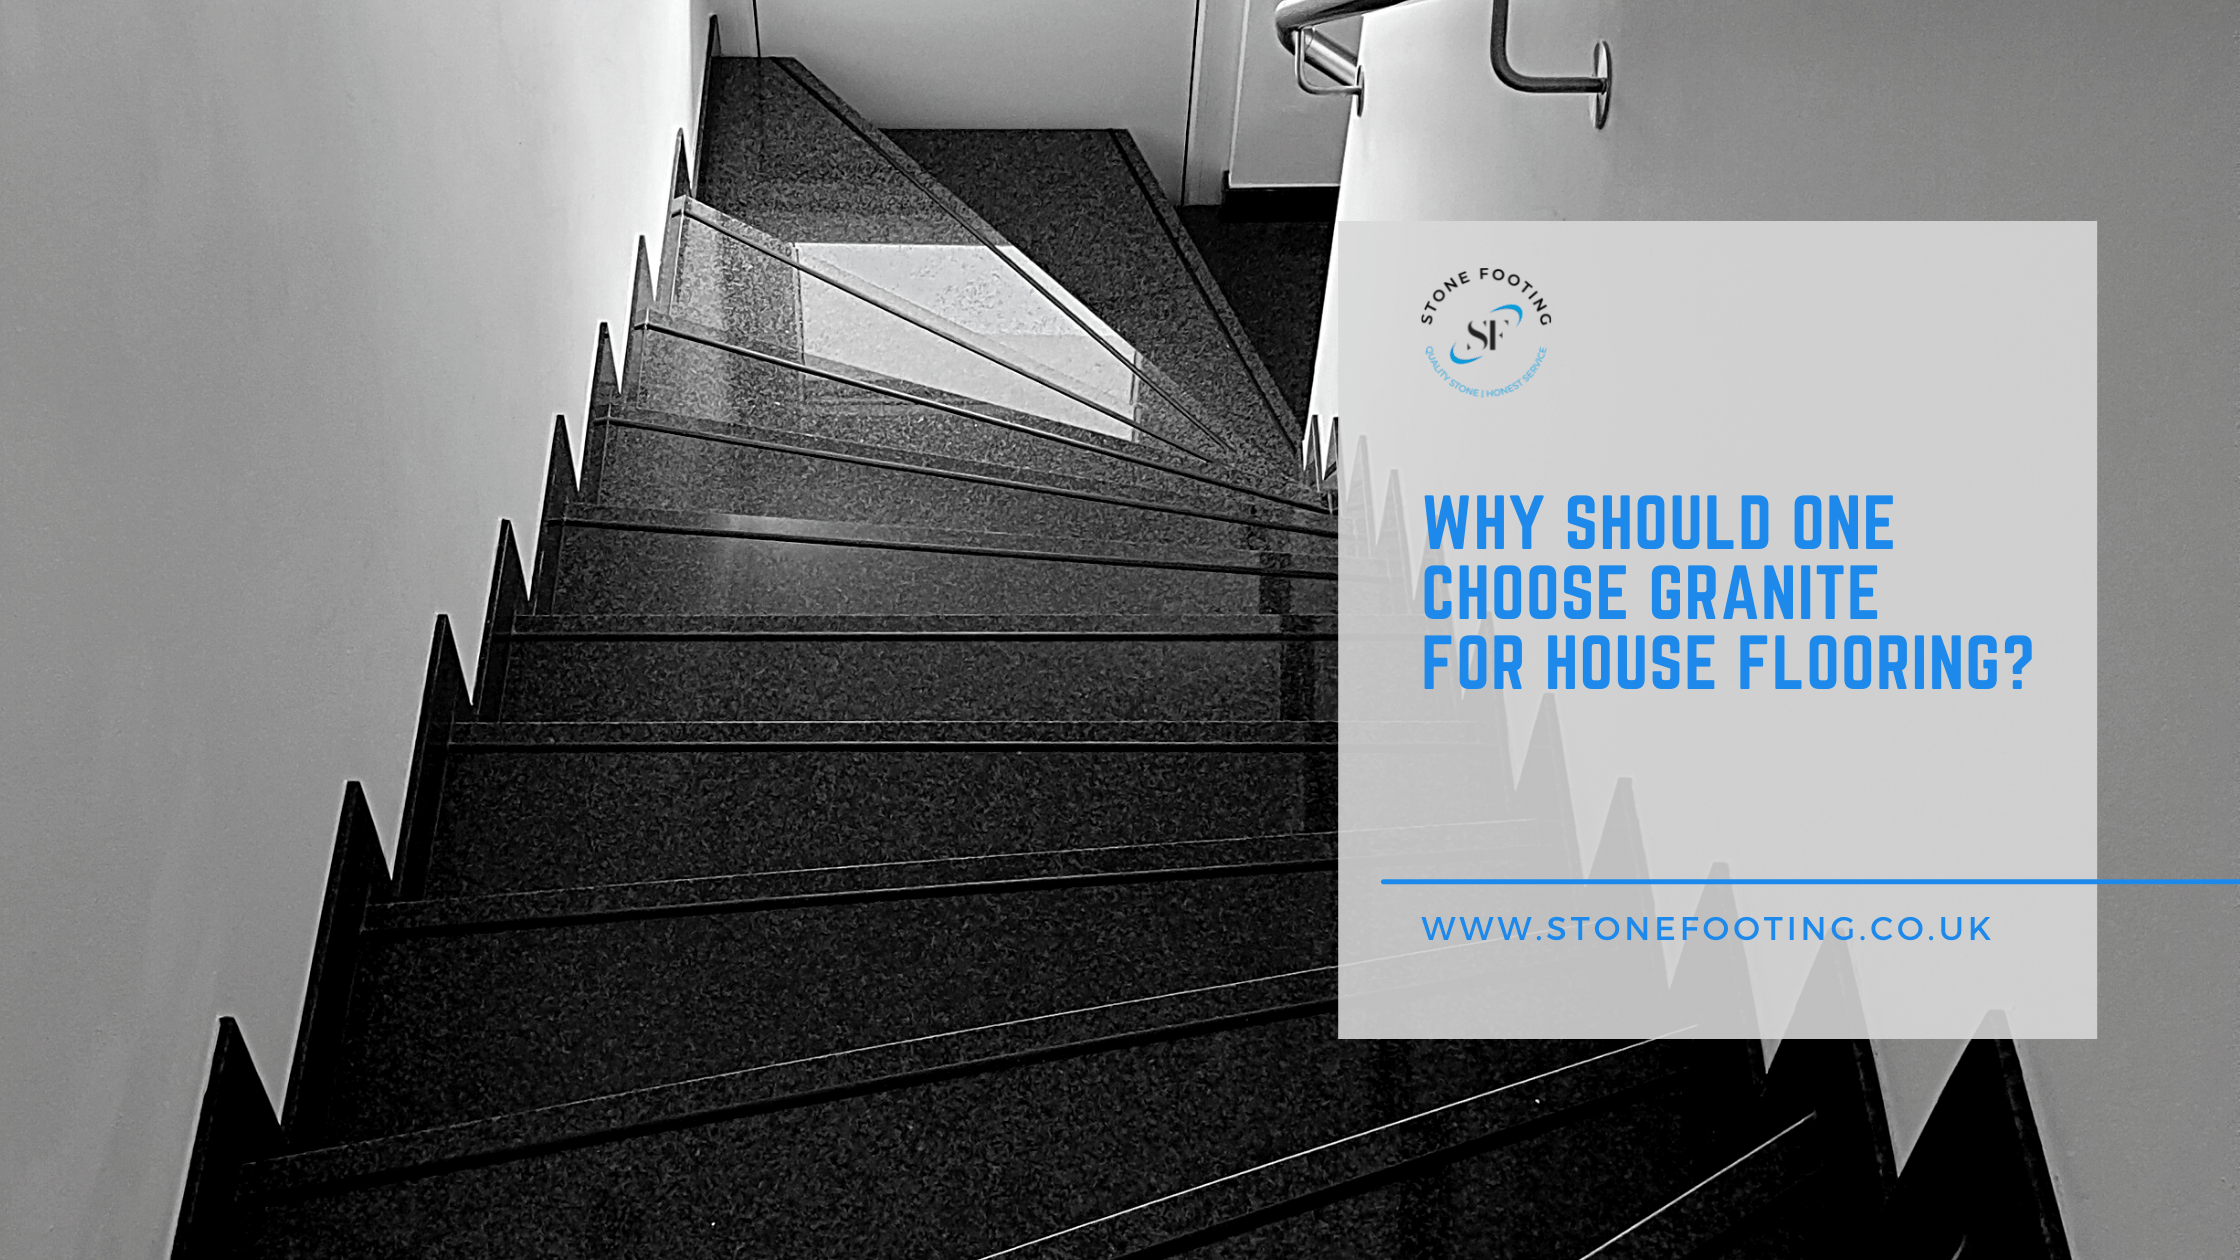 Why Should One Choose Granite For House Flooring?